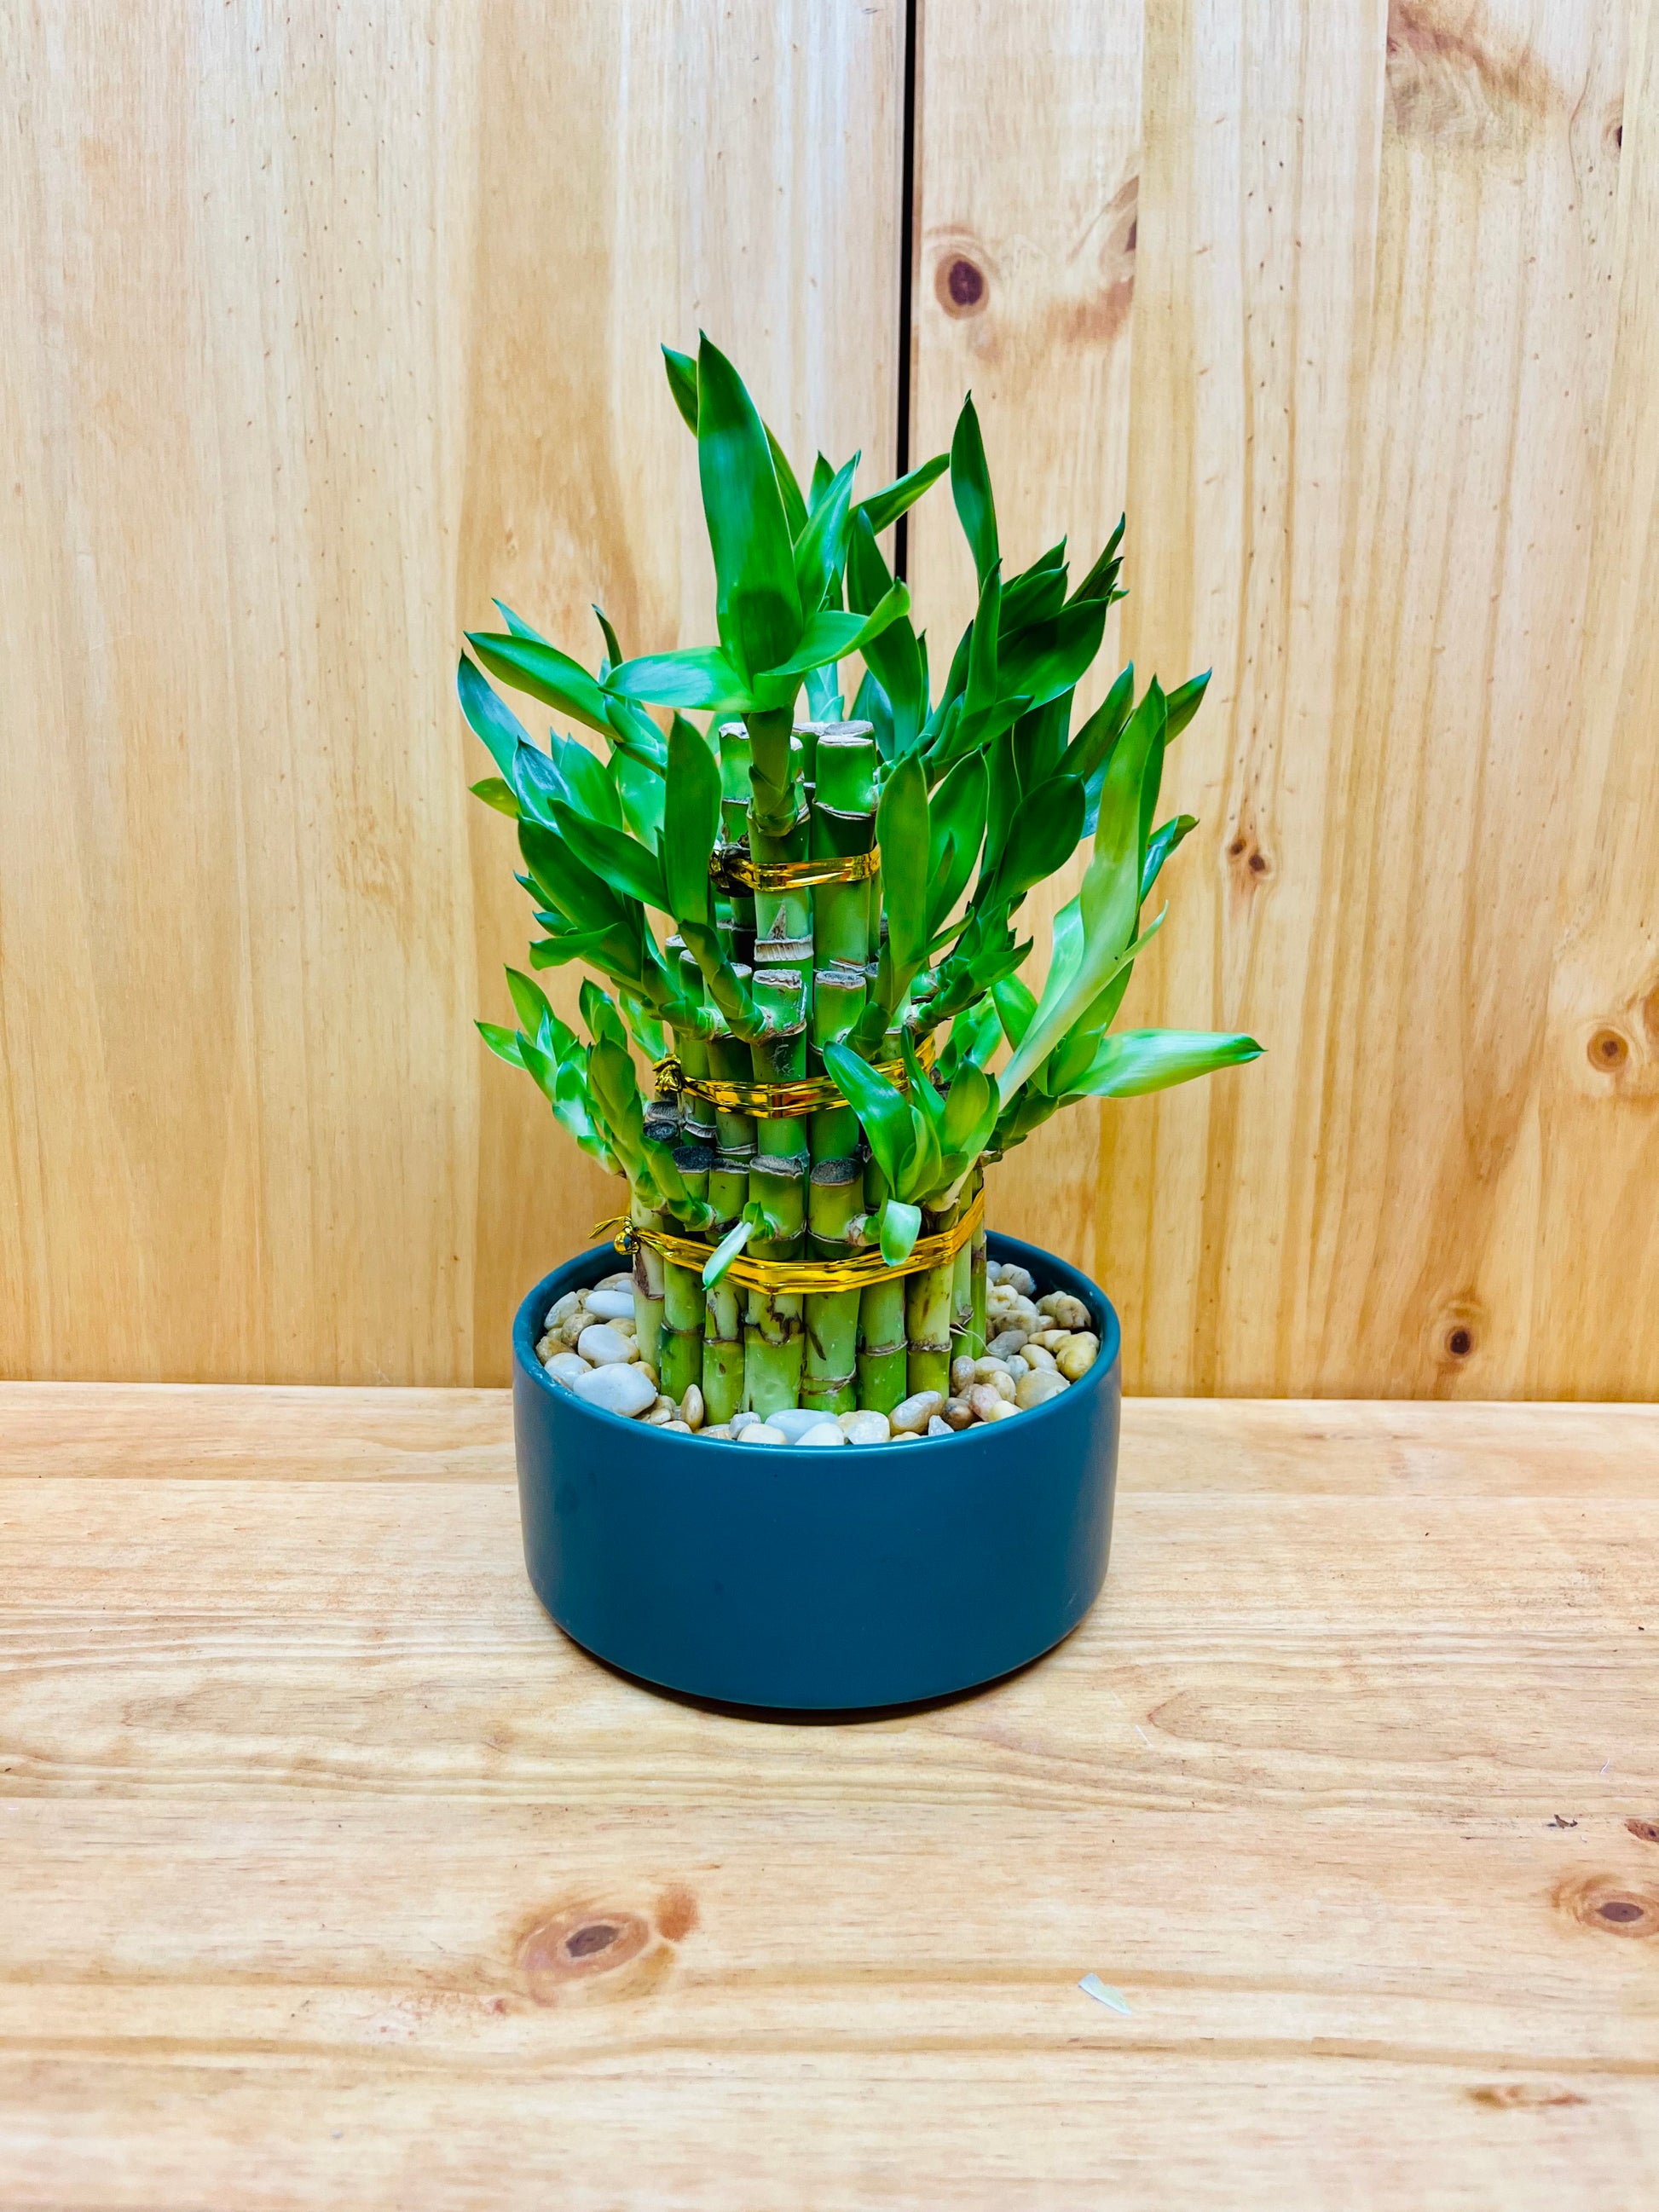 Live Lucky Bamboo Three Tier Tower in Blue Vase, easy care houseplant